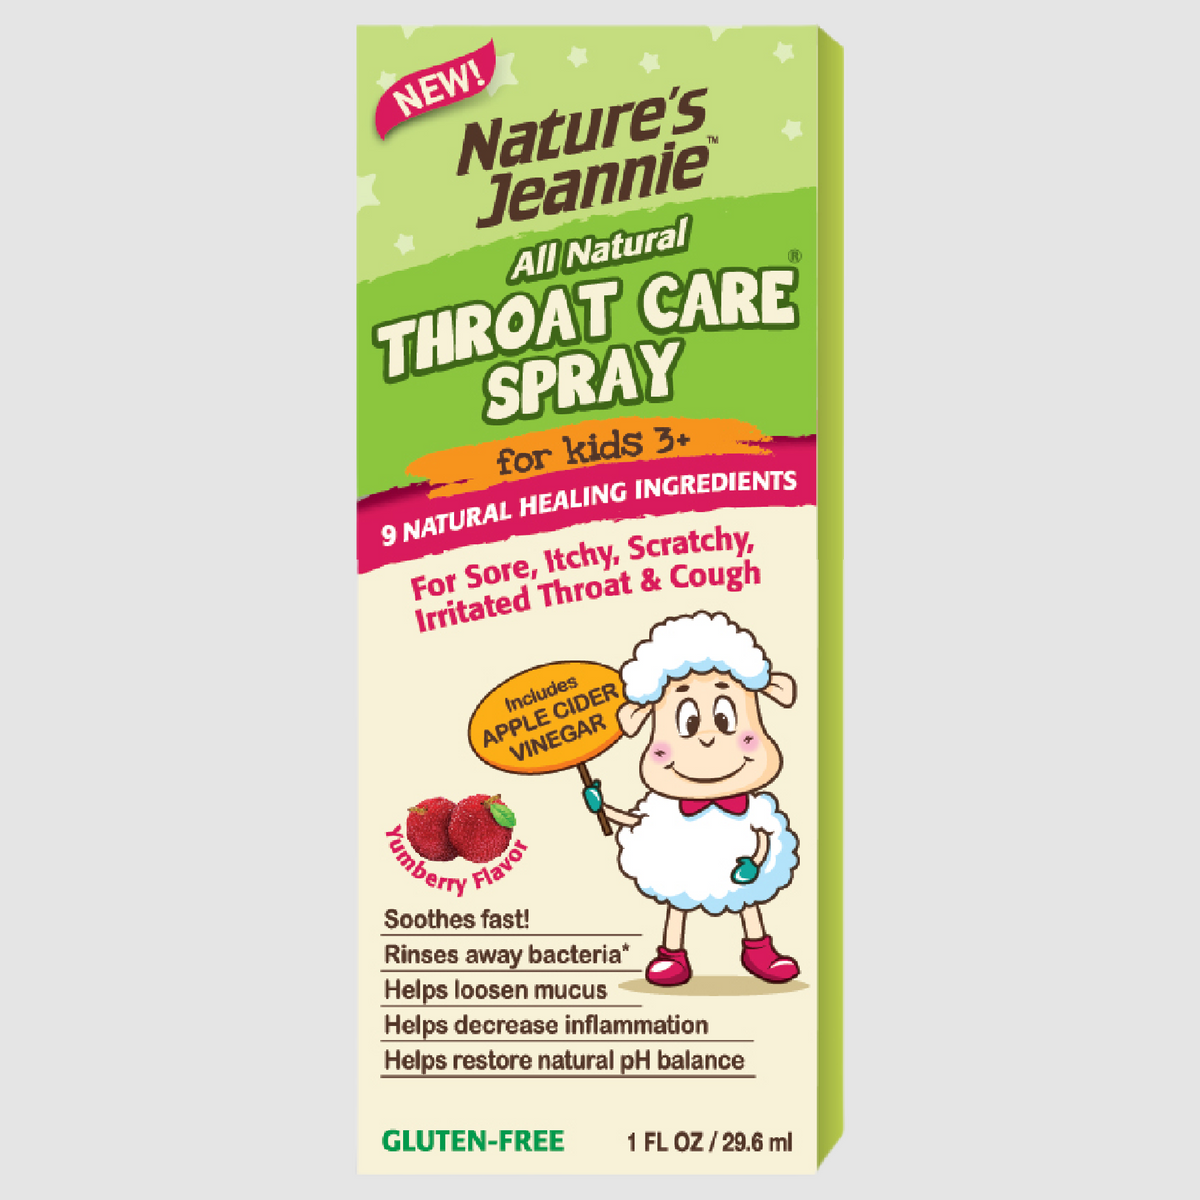 Nature&#39;s Jeannie Throat Care Spray for Kid&#39;s 3+ product package.